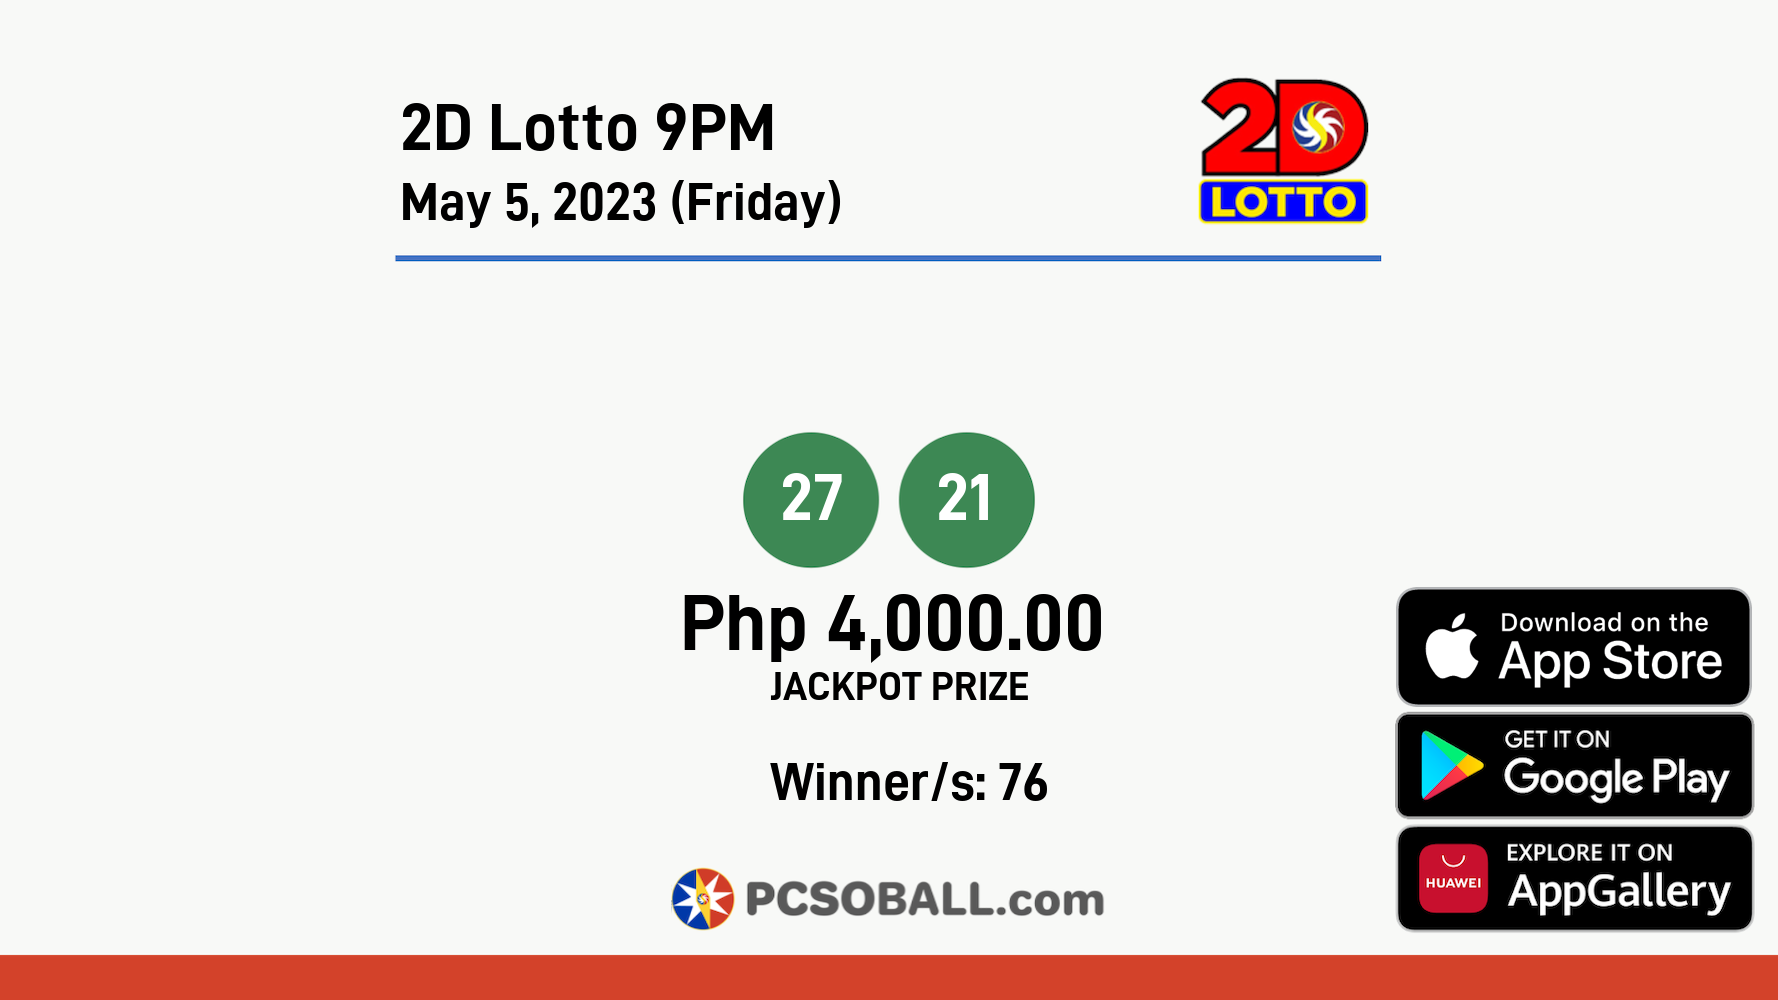 2D Lotto 9PM May 5, 2023 (Friday) Result